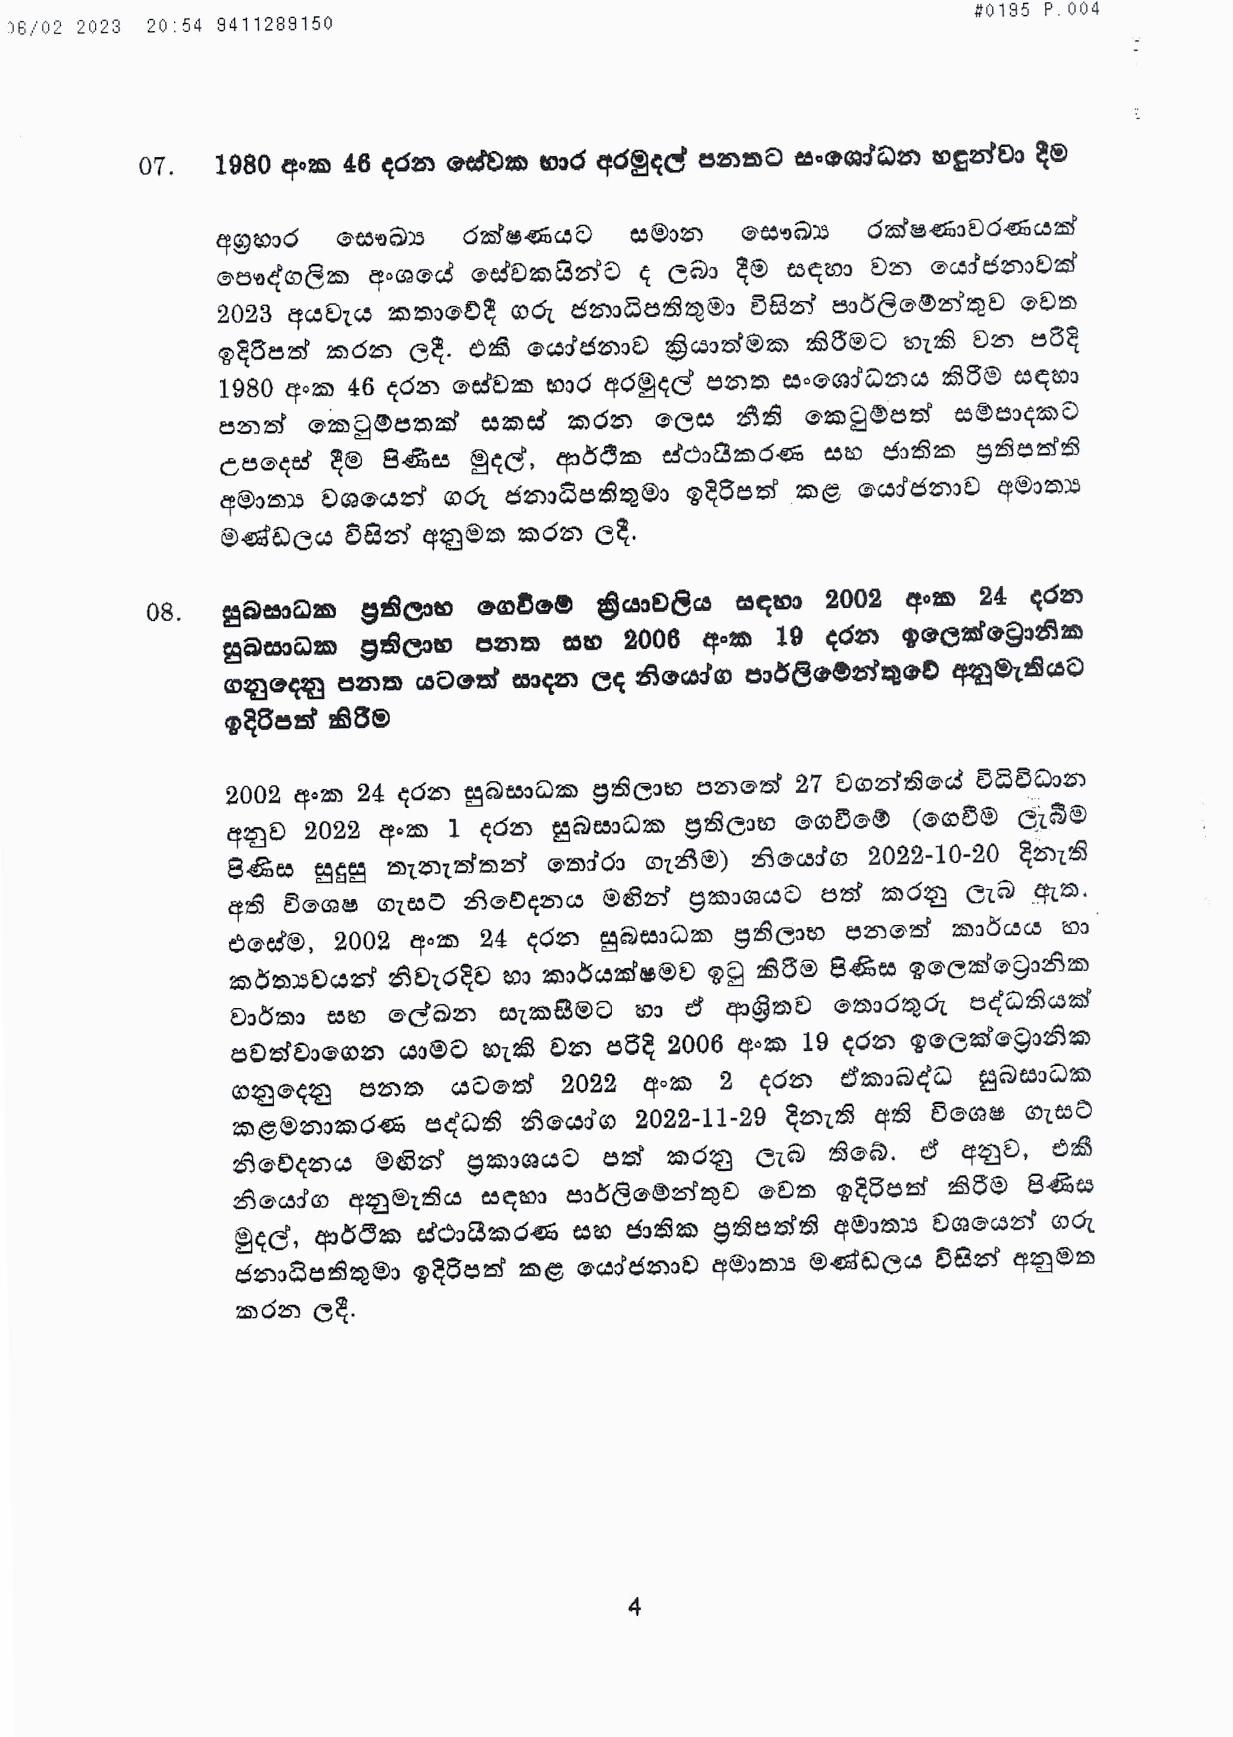 Cabinet Decision on 06.02.2023 page 004